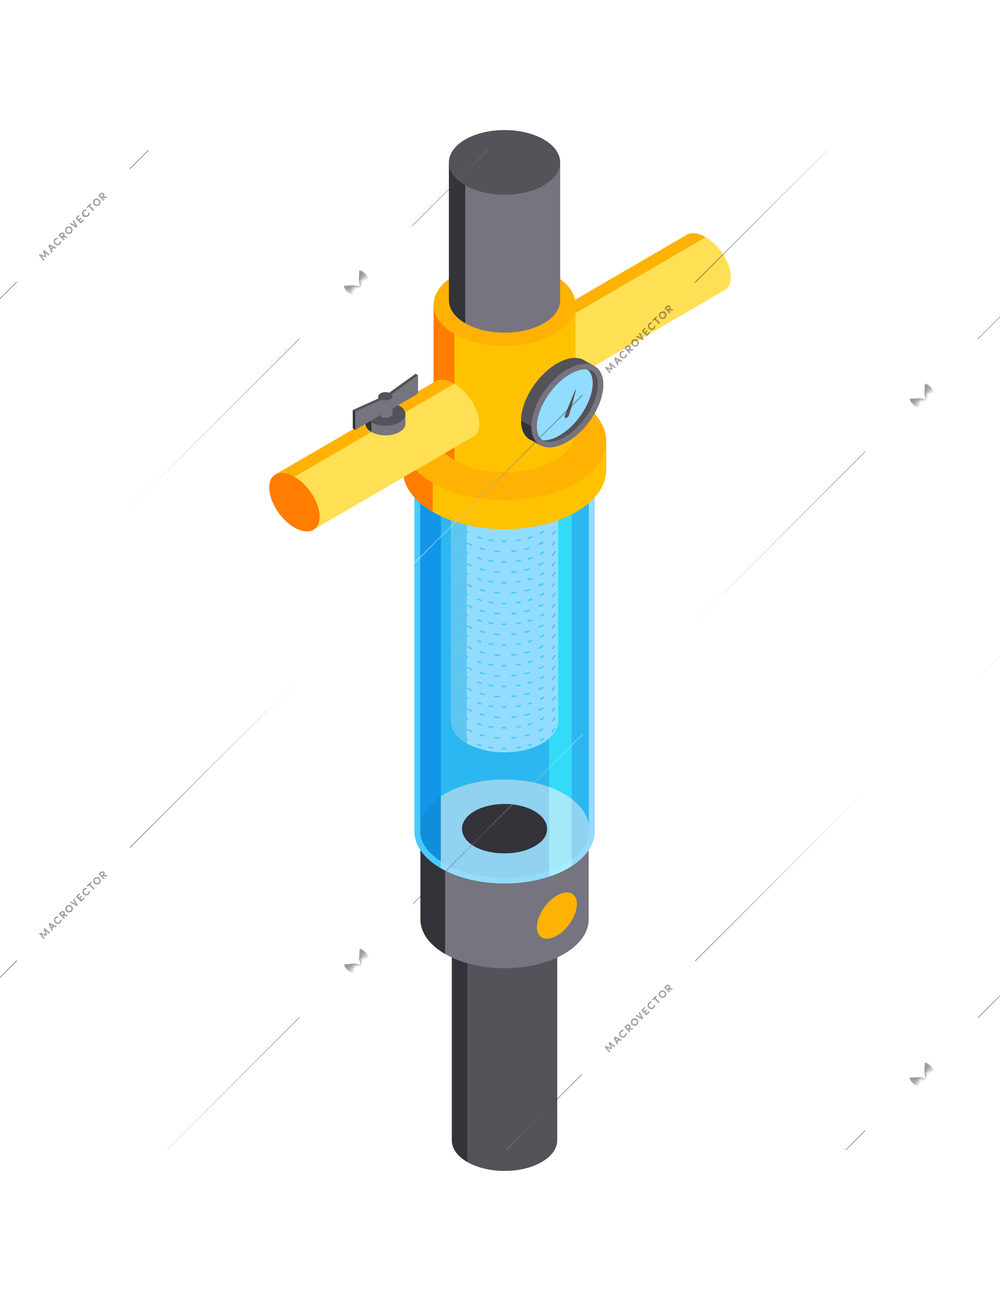 Isometric water purification technology composition with isolated image of water filter on tube vector illustration